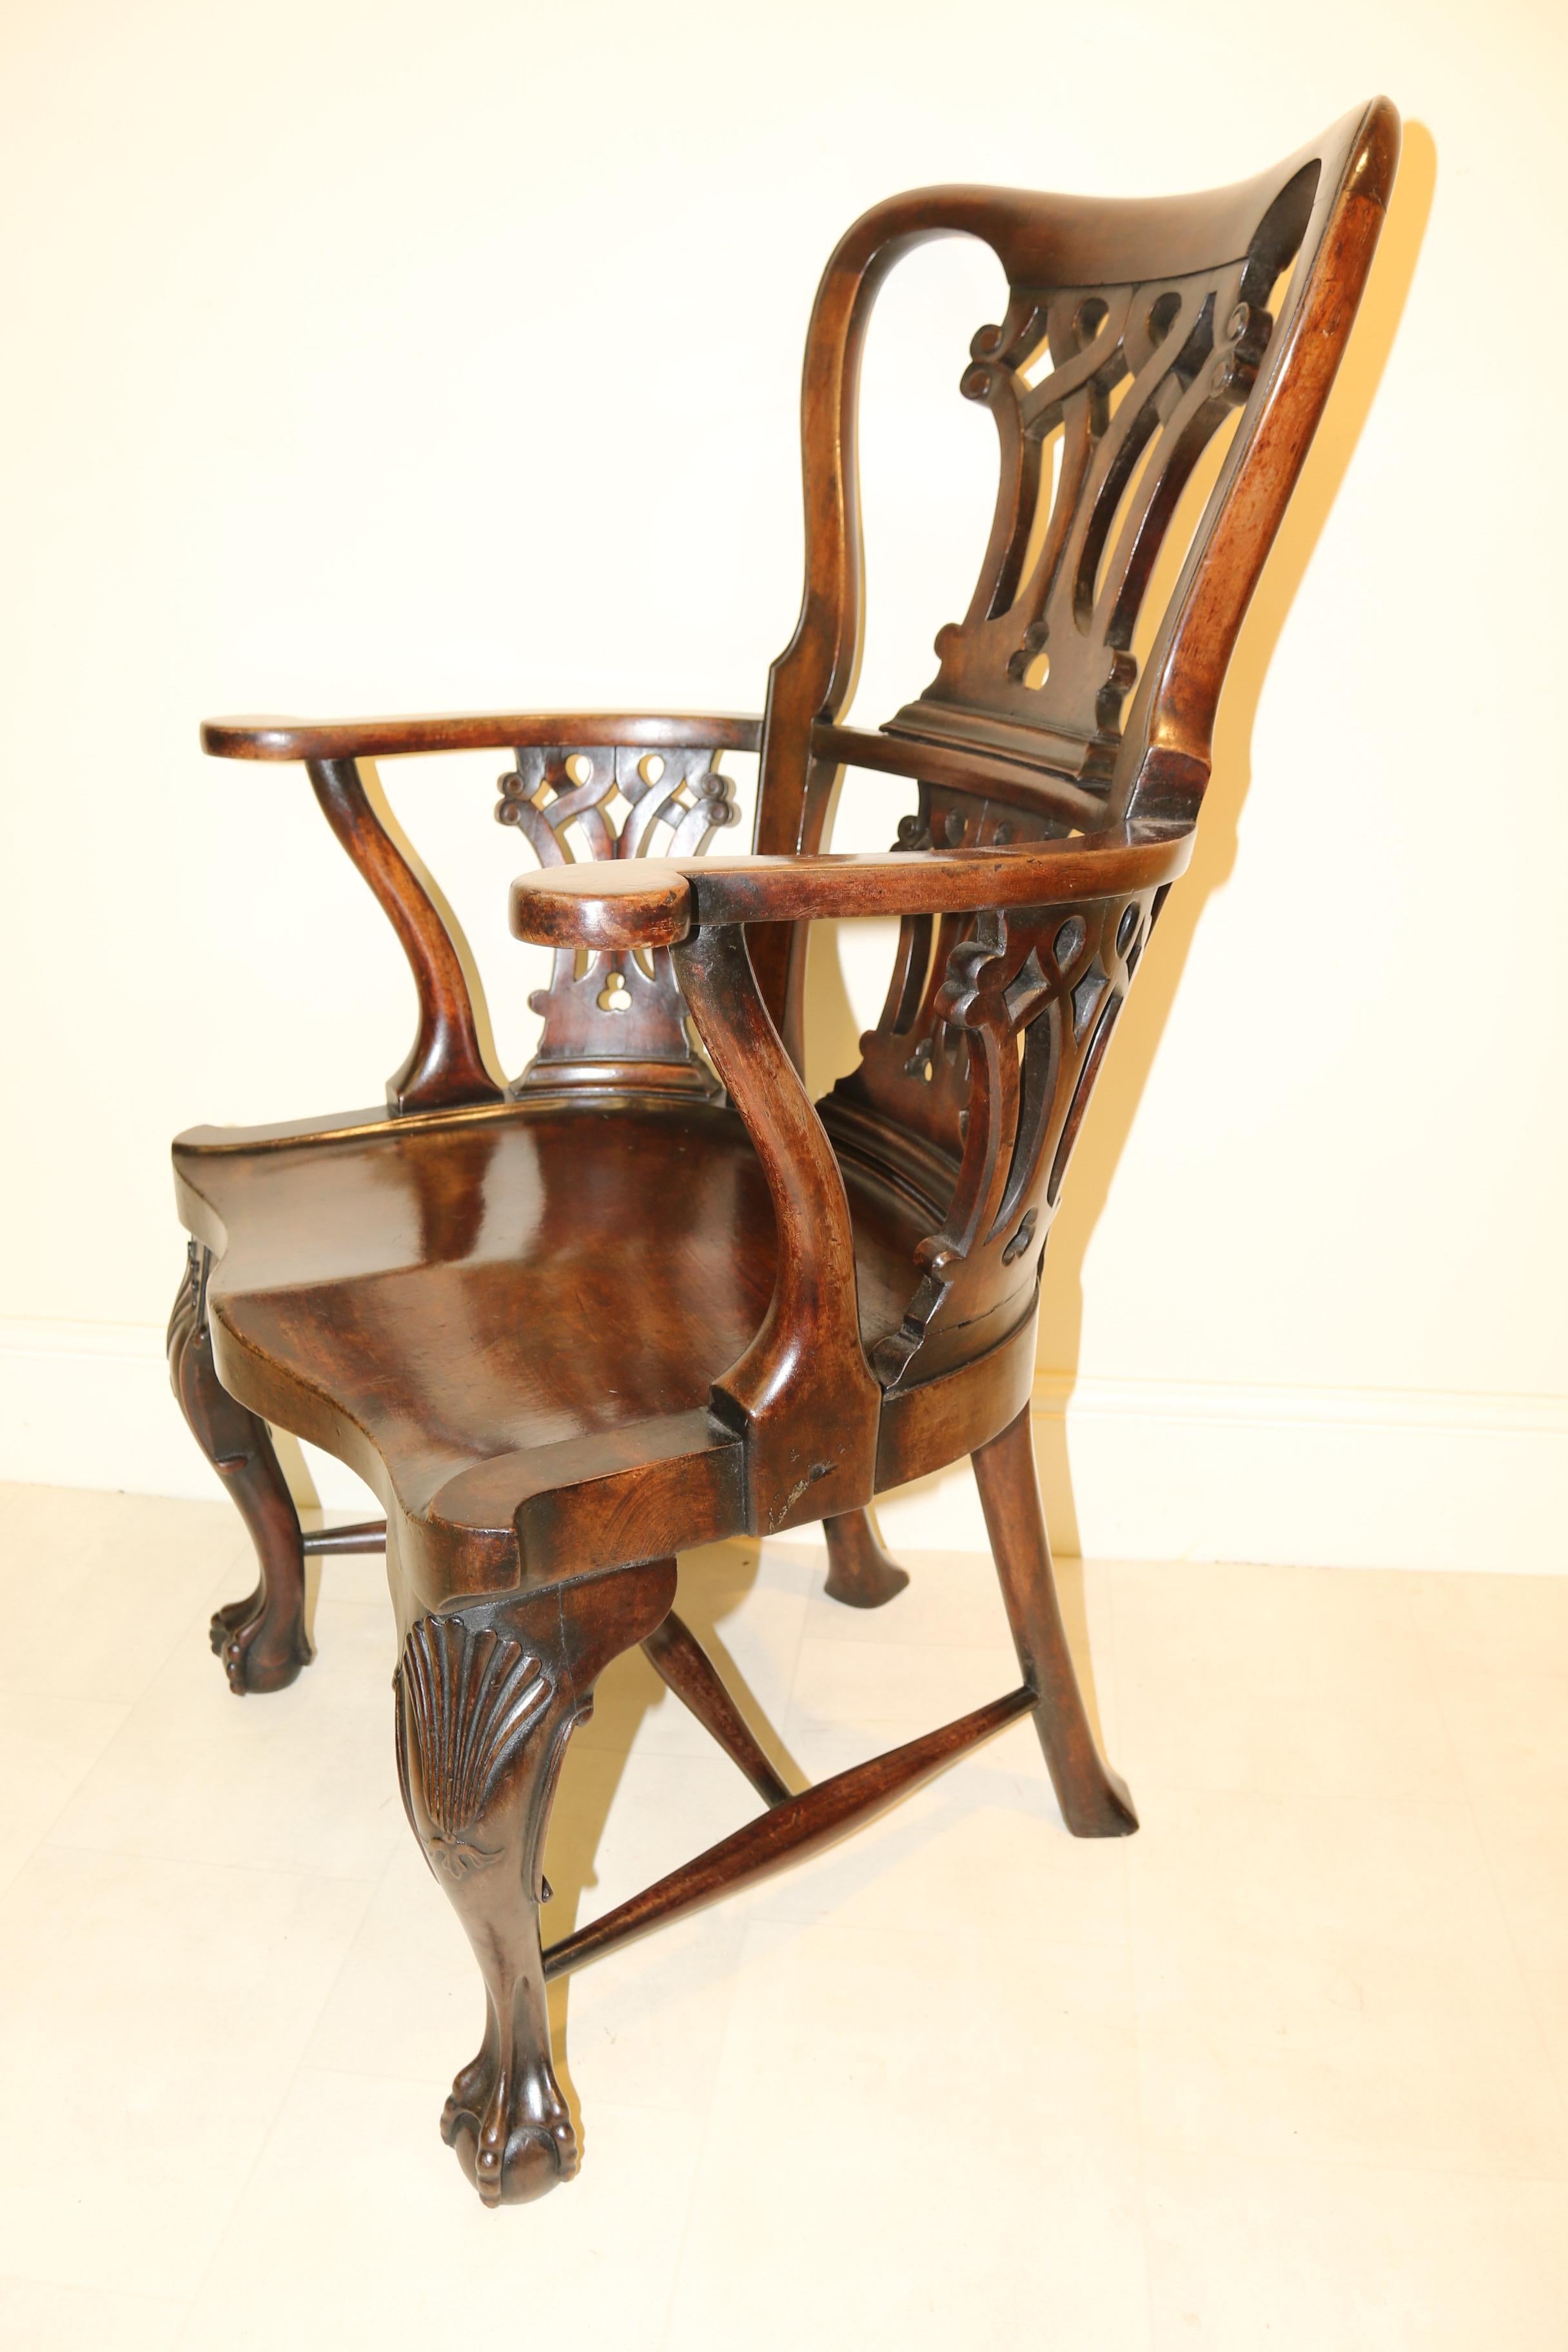 Antique English George II Period Mahogany Windsor Armchair, circa 1750 For Sale 16